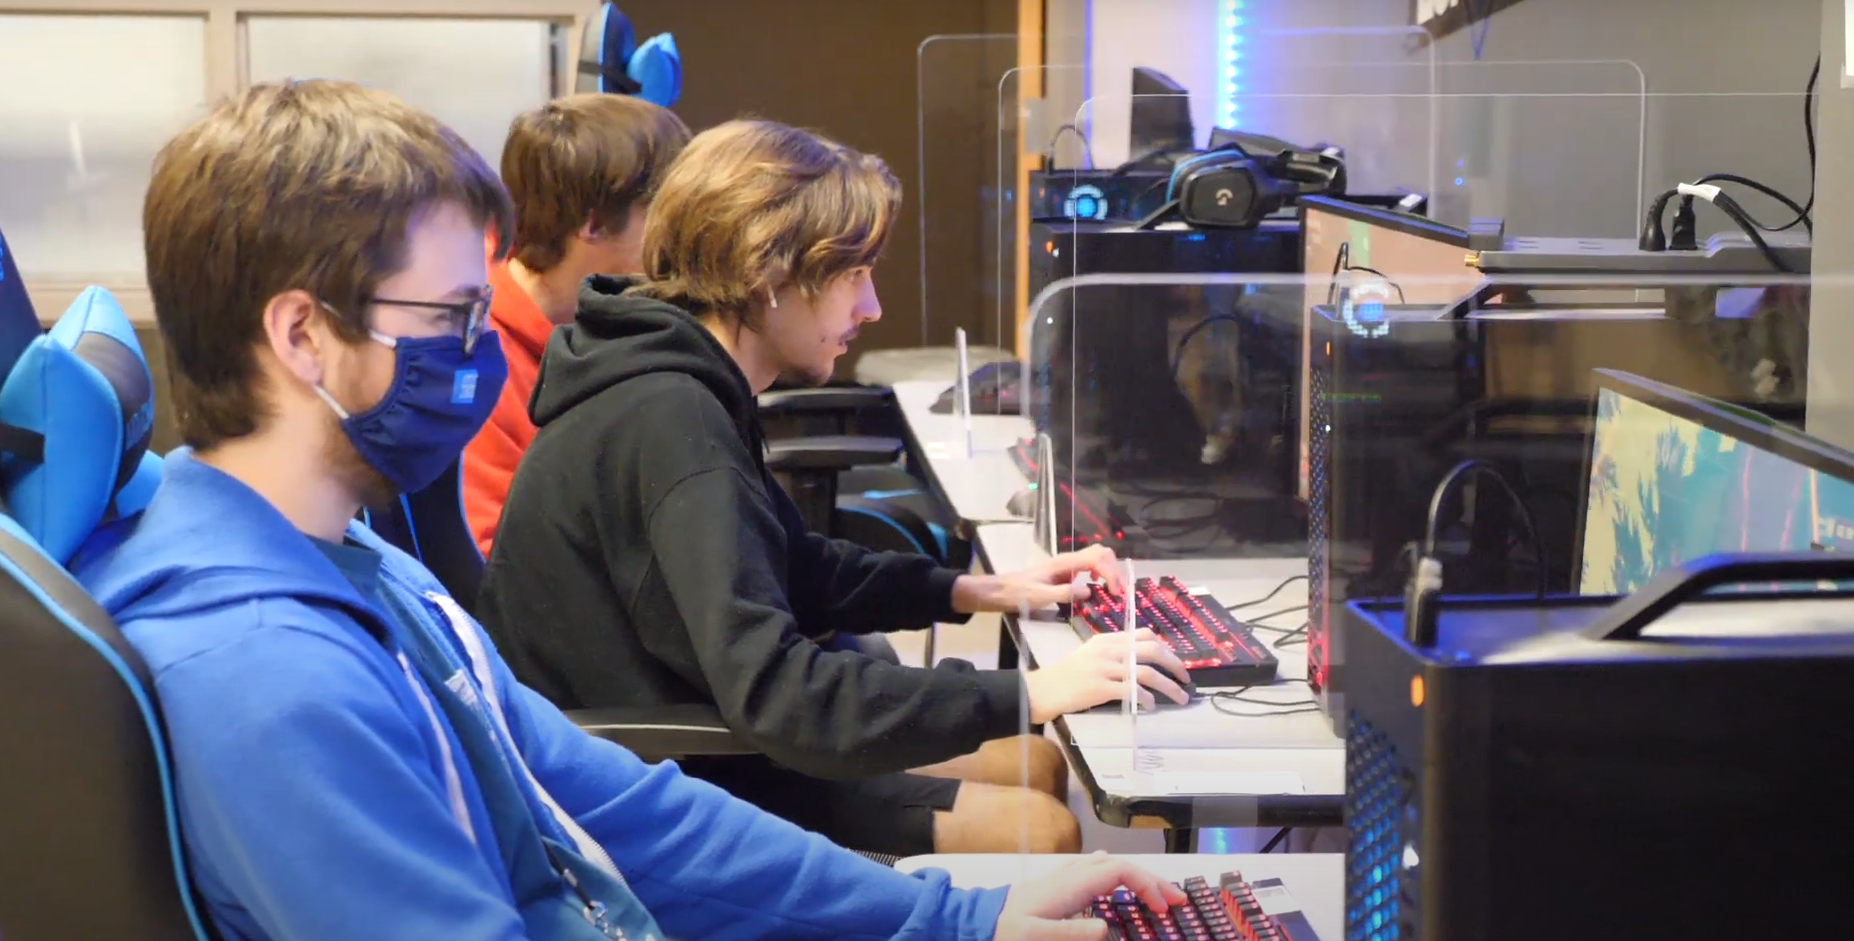 Esports in Mansfield ISD is Fun, Competitive and Educational